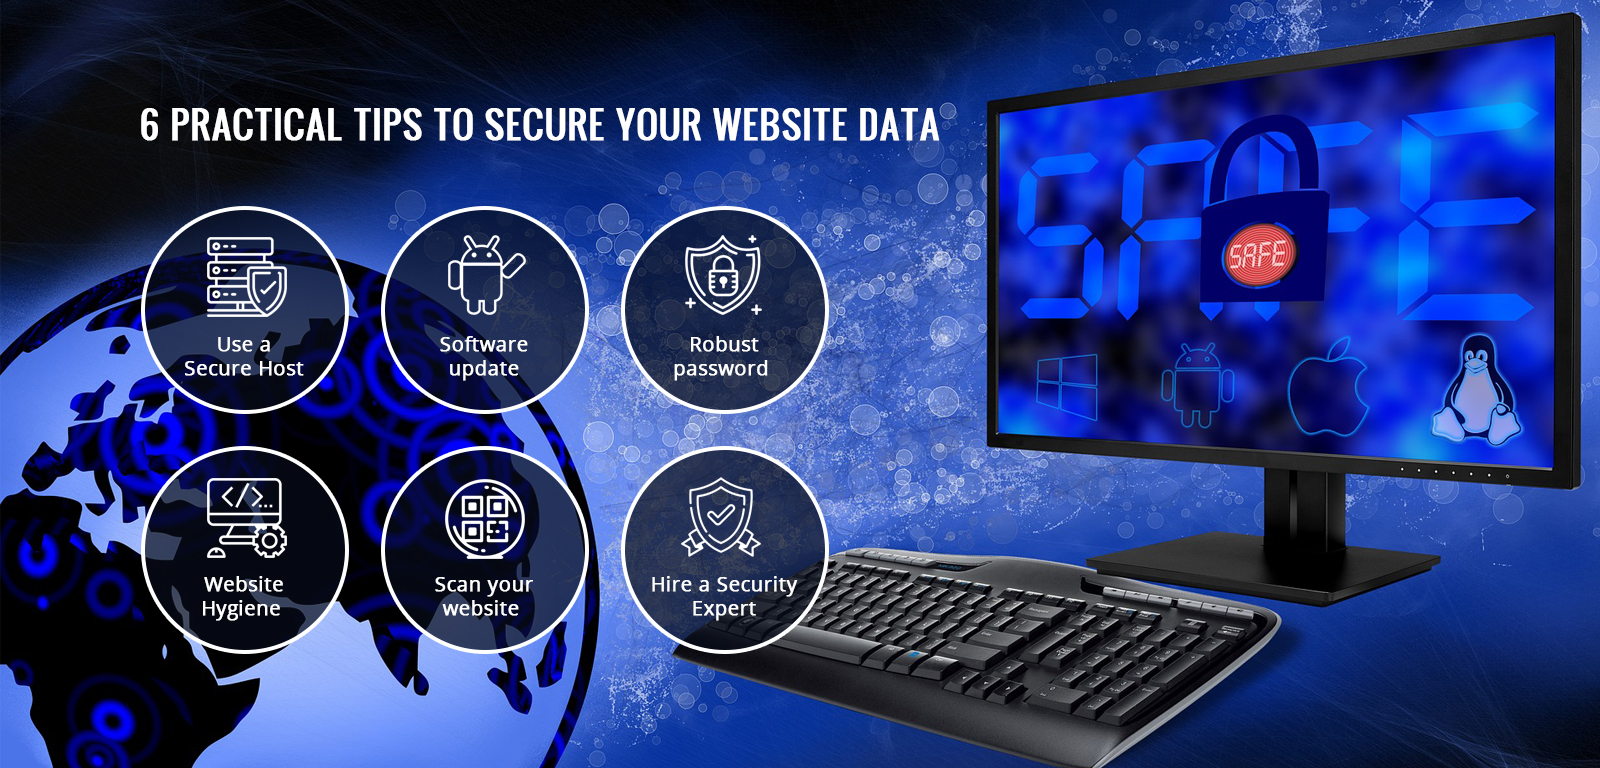 6 Practical Tips to Secure Your Website Data